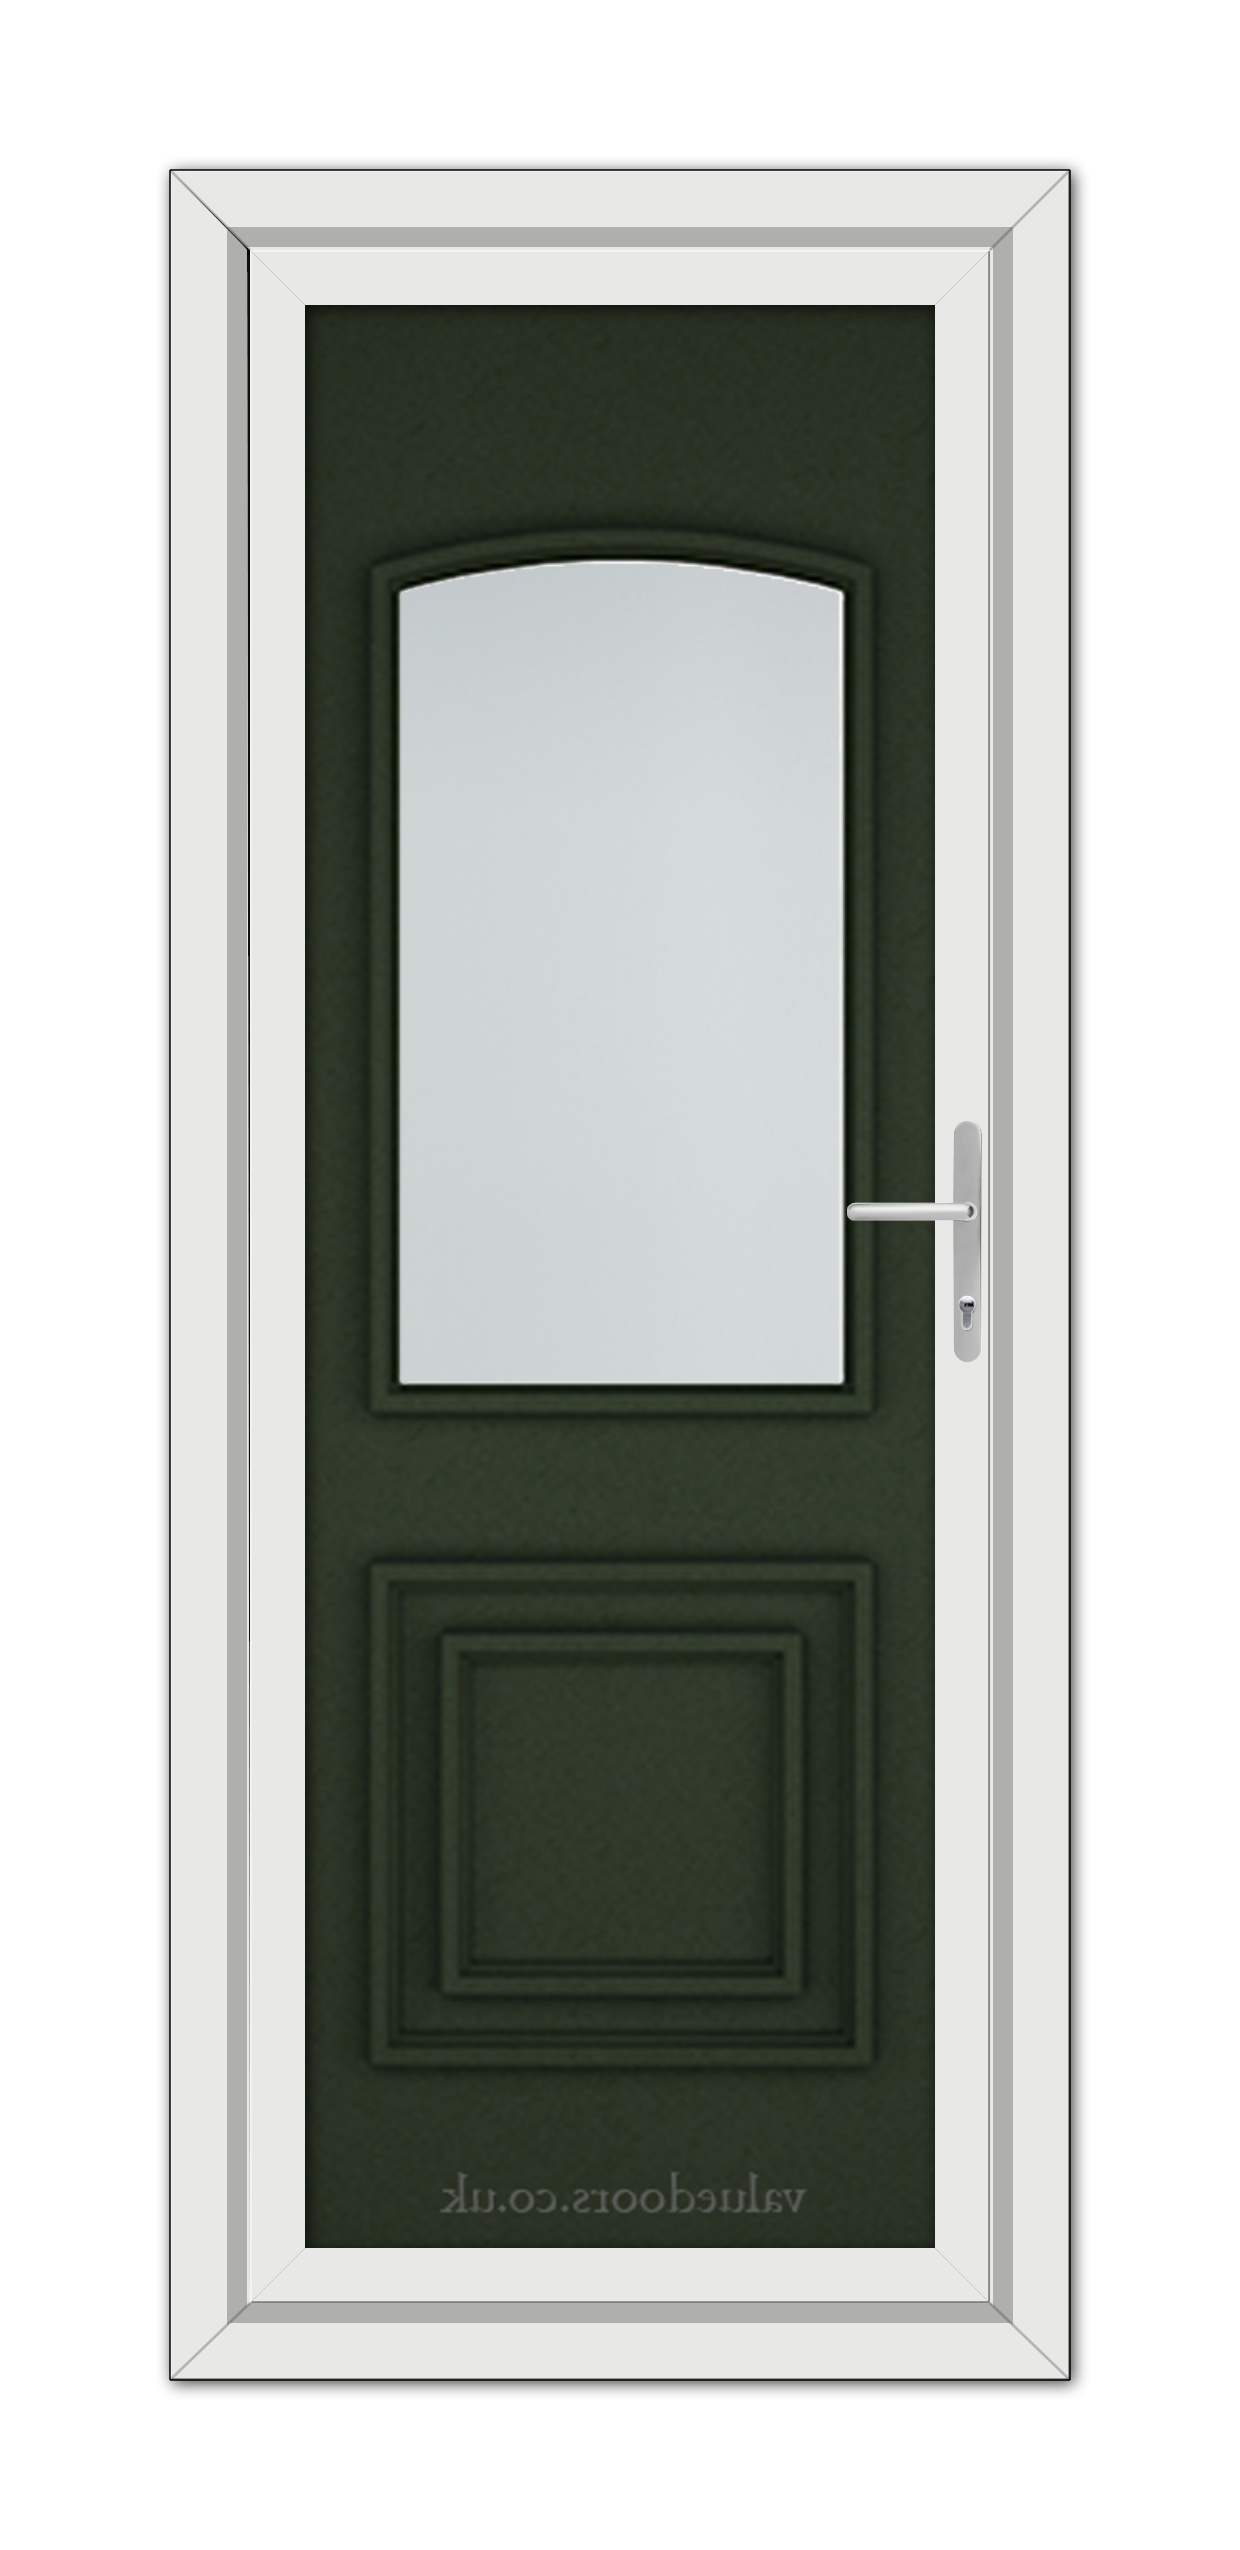 A Green Balmoral Classic uPVC door with a vertical rectangular window at the top, a decorative panel at the bottom, and a silver handle on the right, set within a white frame.